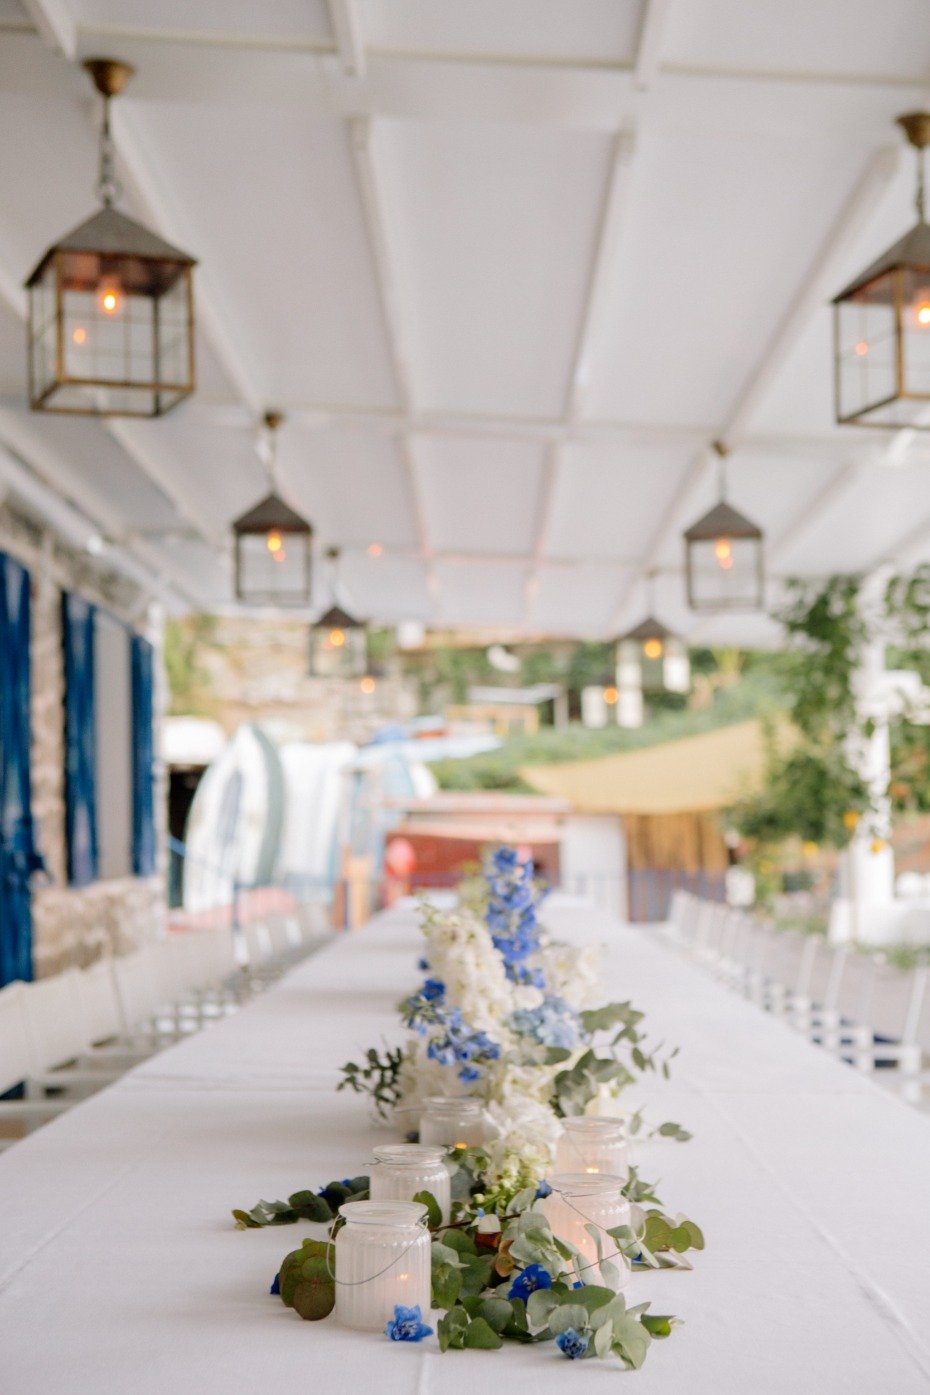 Romantic welcome dinner in blue and white